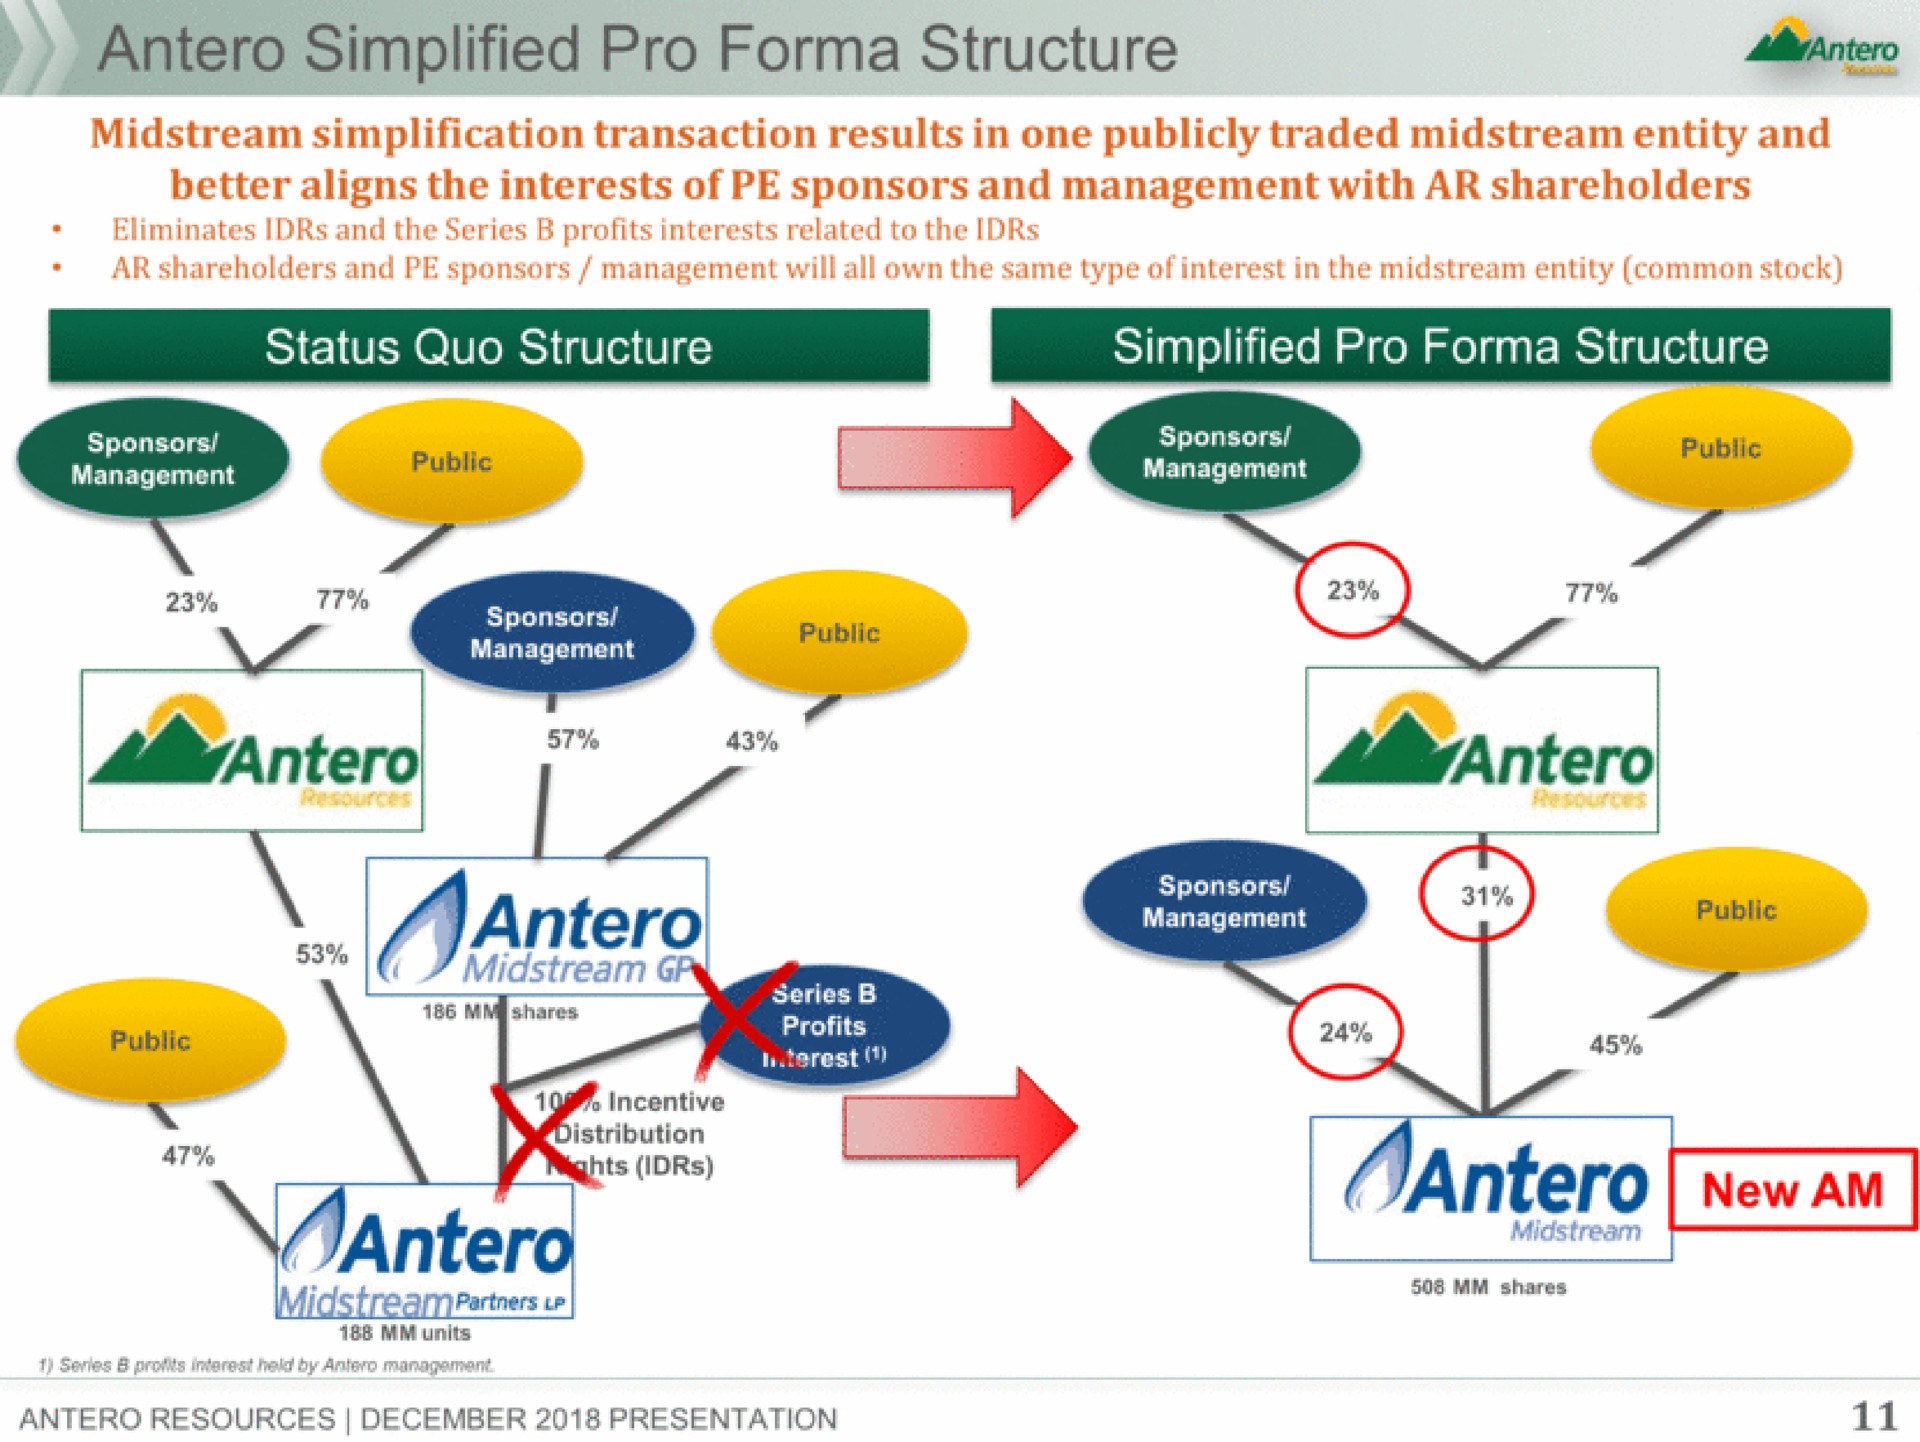 simplified pro structure sled quo structure am a new an | Antero Midstream Partners